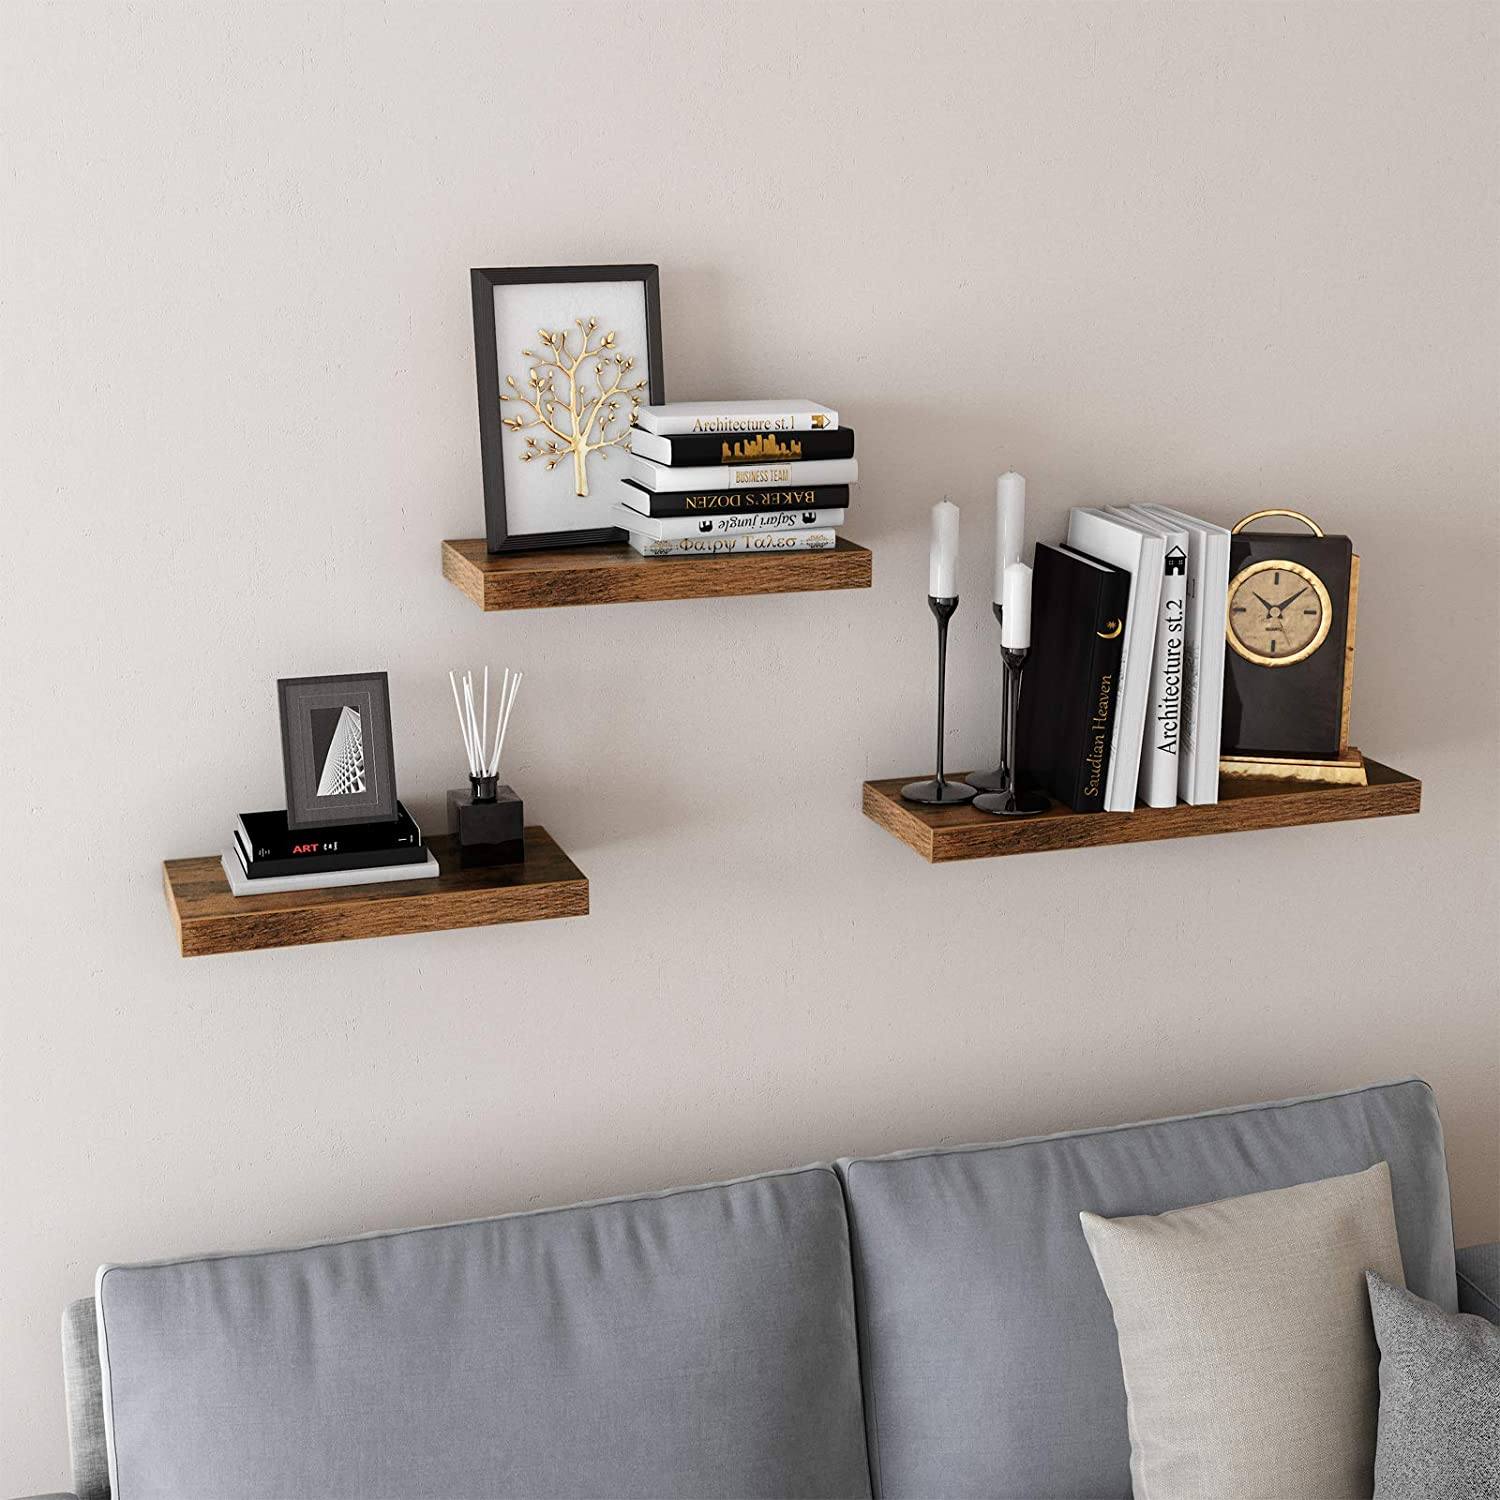 Floating Shelf, Wall Shelf for Photos, Decorations, in Living Room, Kitchen, Hallway, Bedroom, Bathroom, Rustic Brown LWS24BX RAW58.dk 